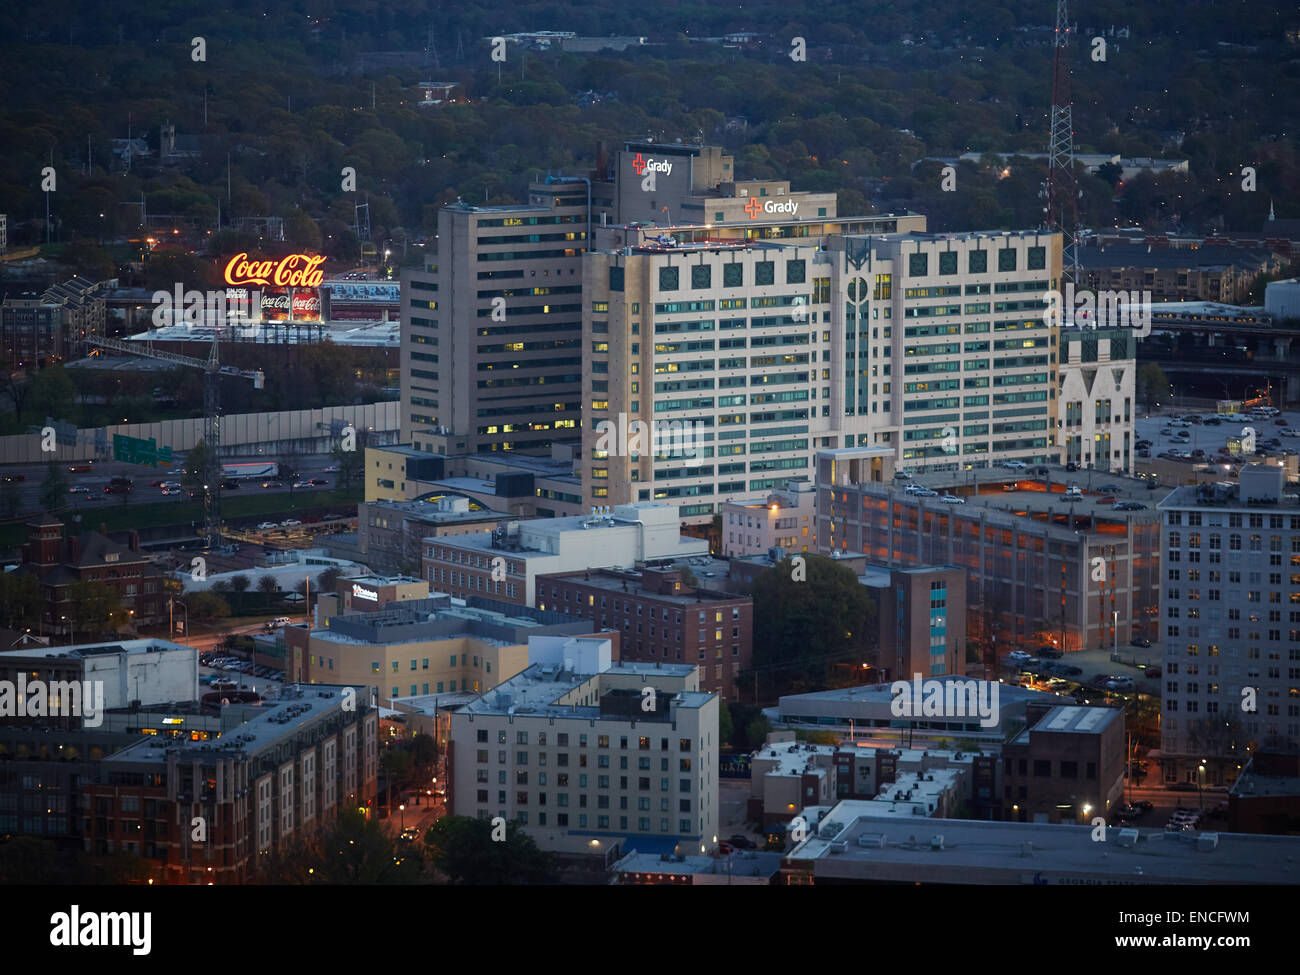 `Downtown Atlanta in Georga USA Grady Memorial Hospital in Atlanta complete with helicopter landing pad Stock Photo